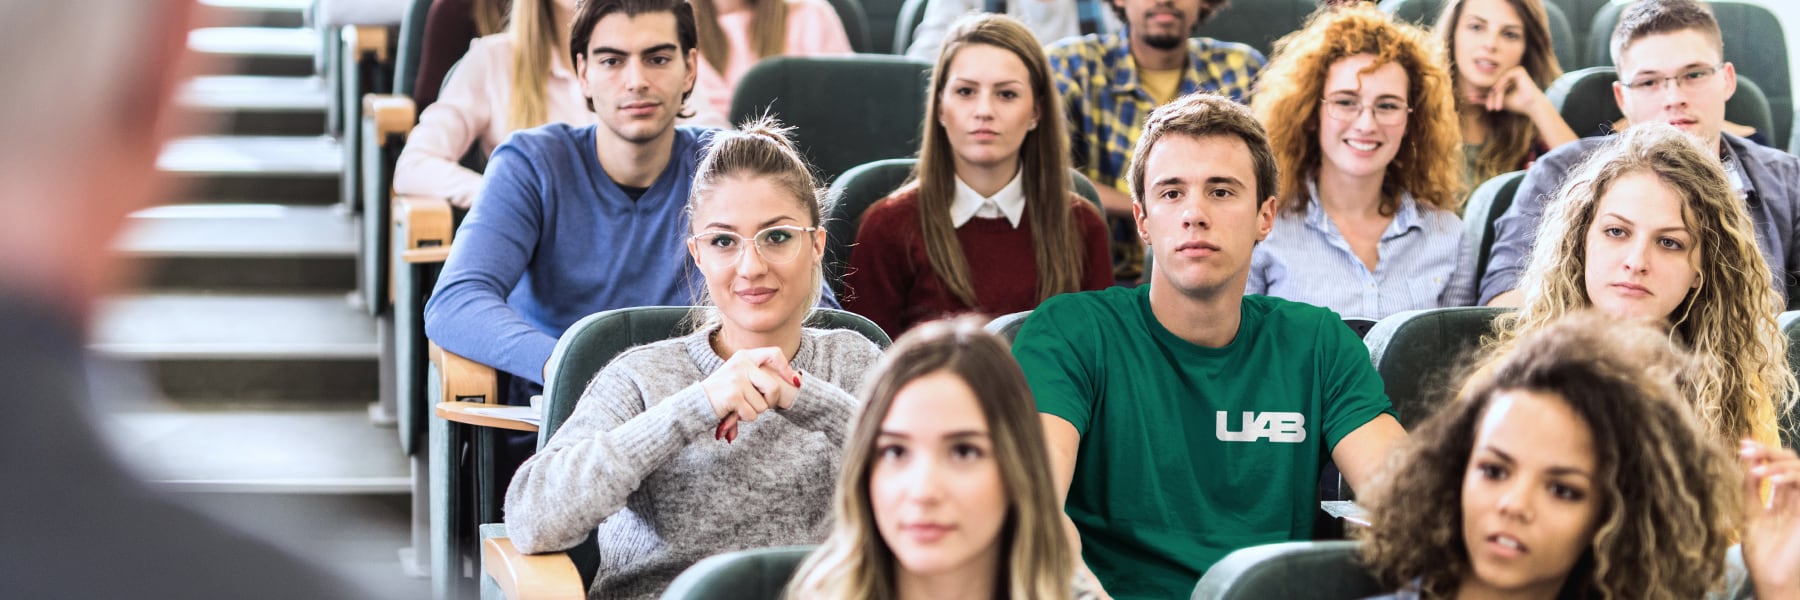 Students sitting in a classroom listening to a lecture.